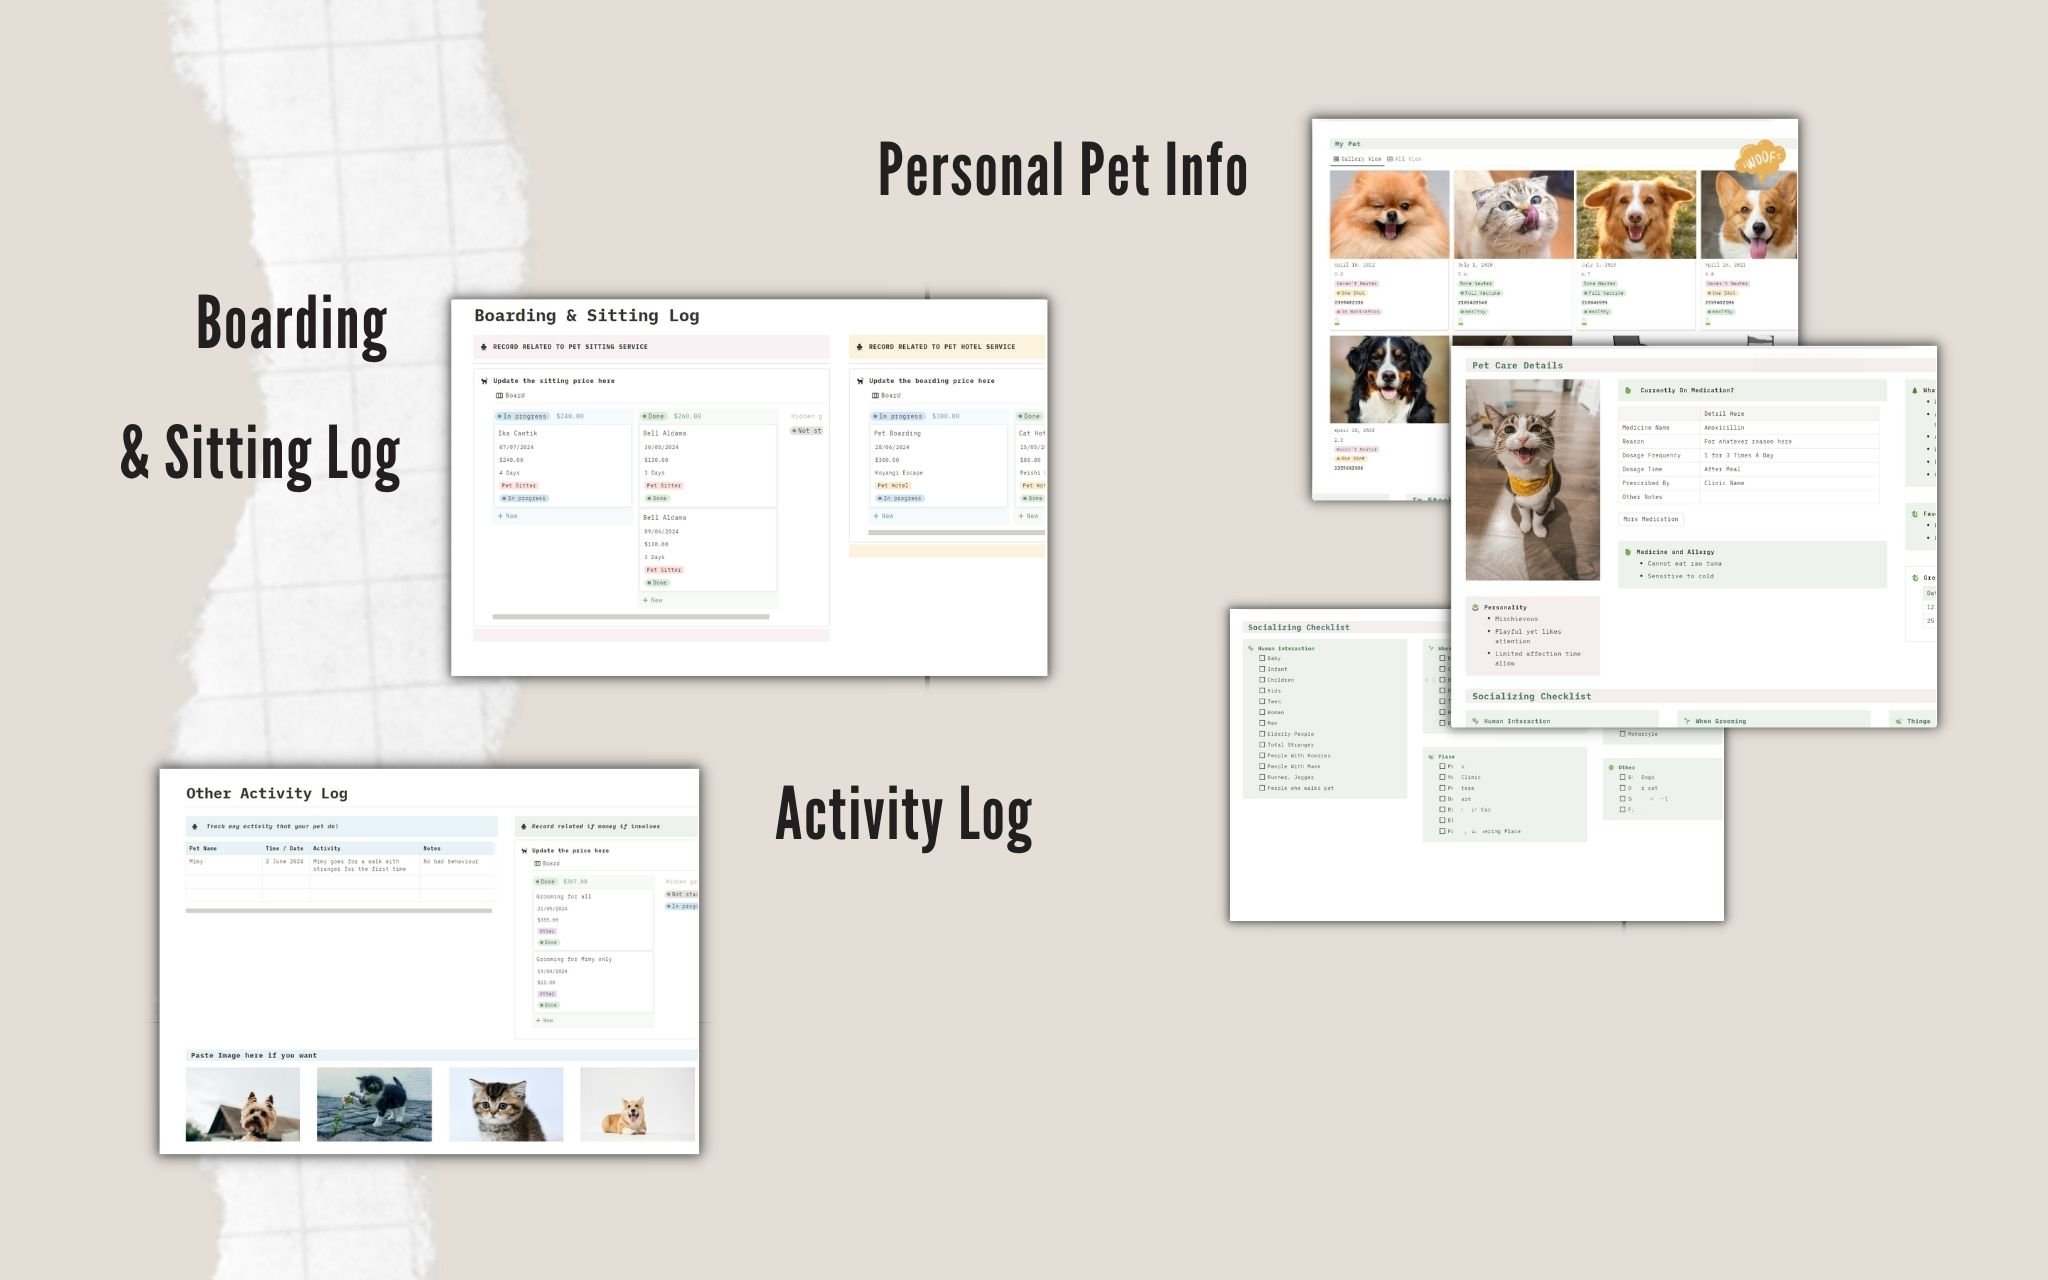 Your one-stop solution for organizing and managing every aspect of your pet's care for example tracking veterinary visits, medical records, dietary needs, physical activities, grooming schedules, and behavioral logs.